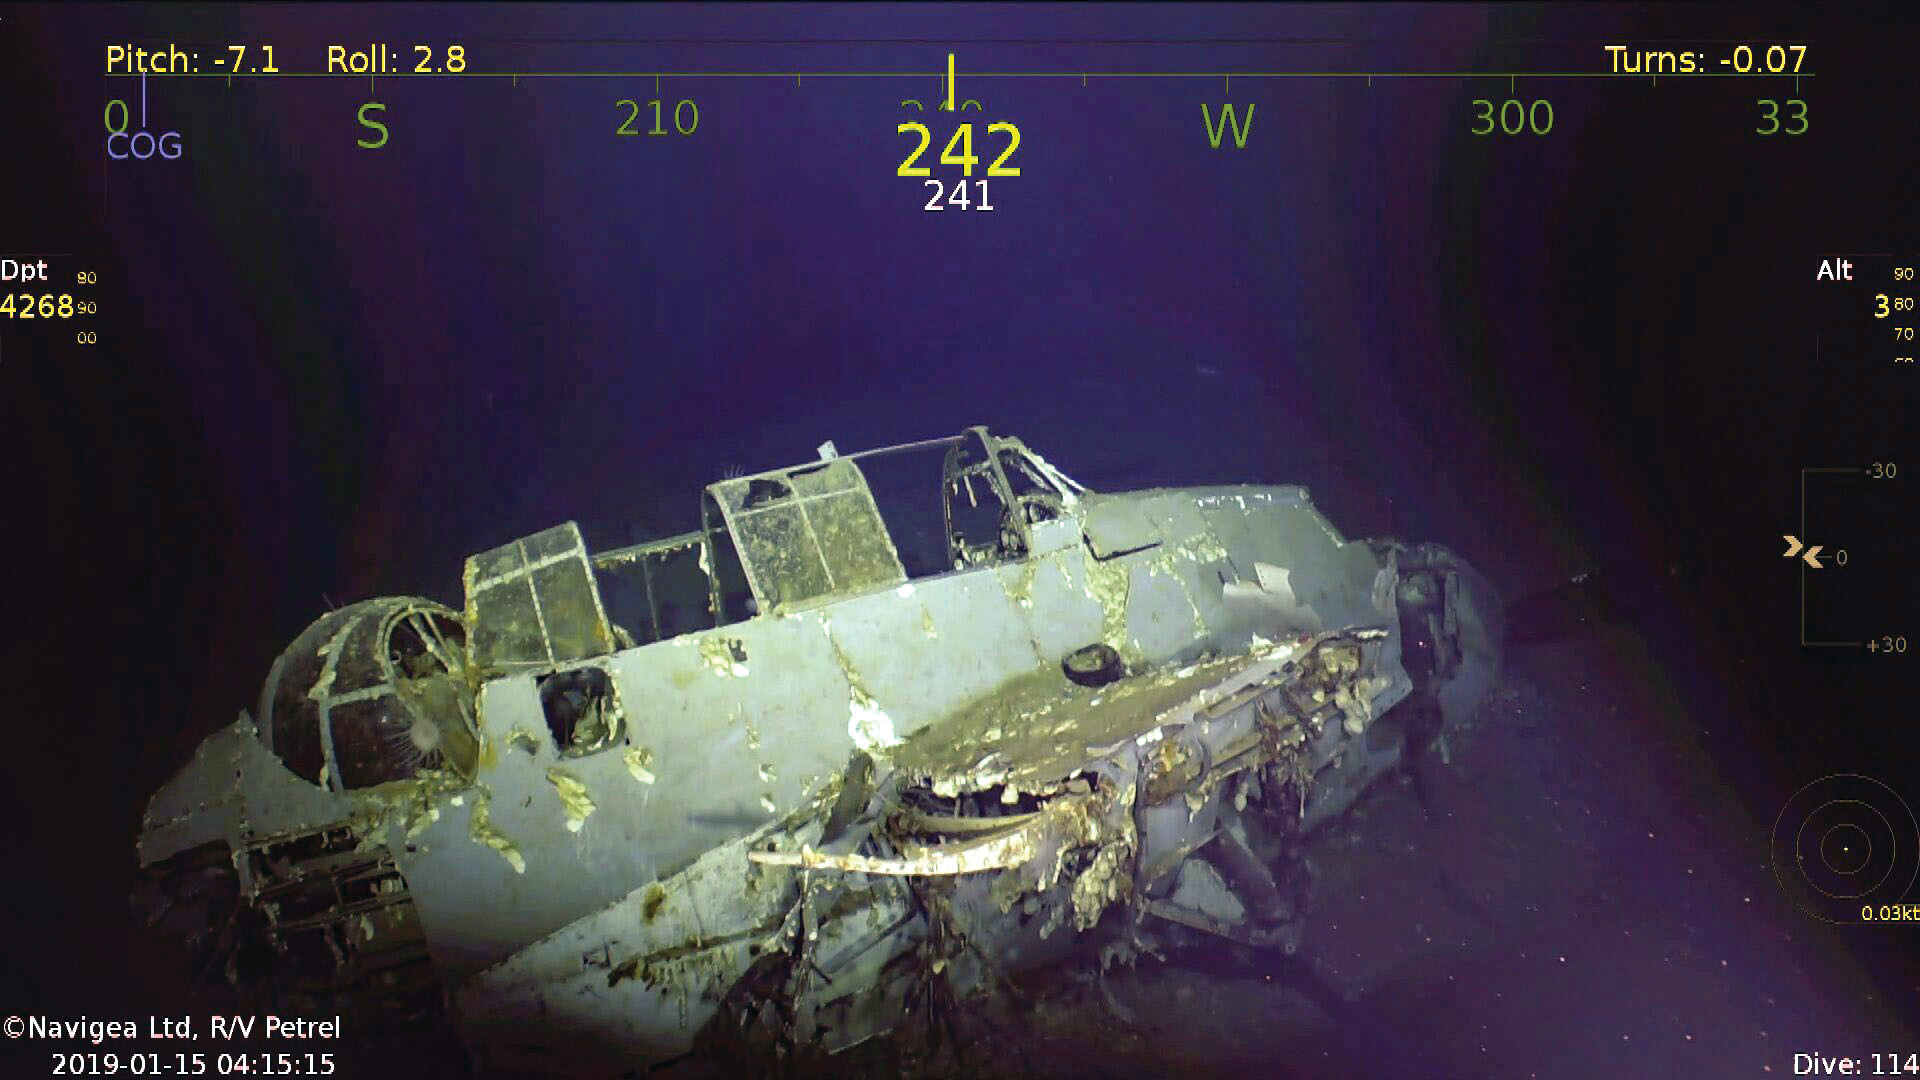 A silent witness to the ferocity of the battle, a badly mangled Dauntless rests near Wasp at a depth of 14,255 feet. 